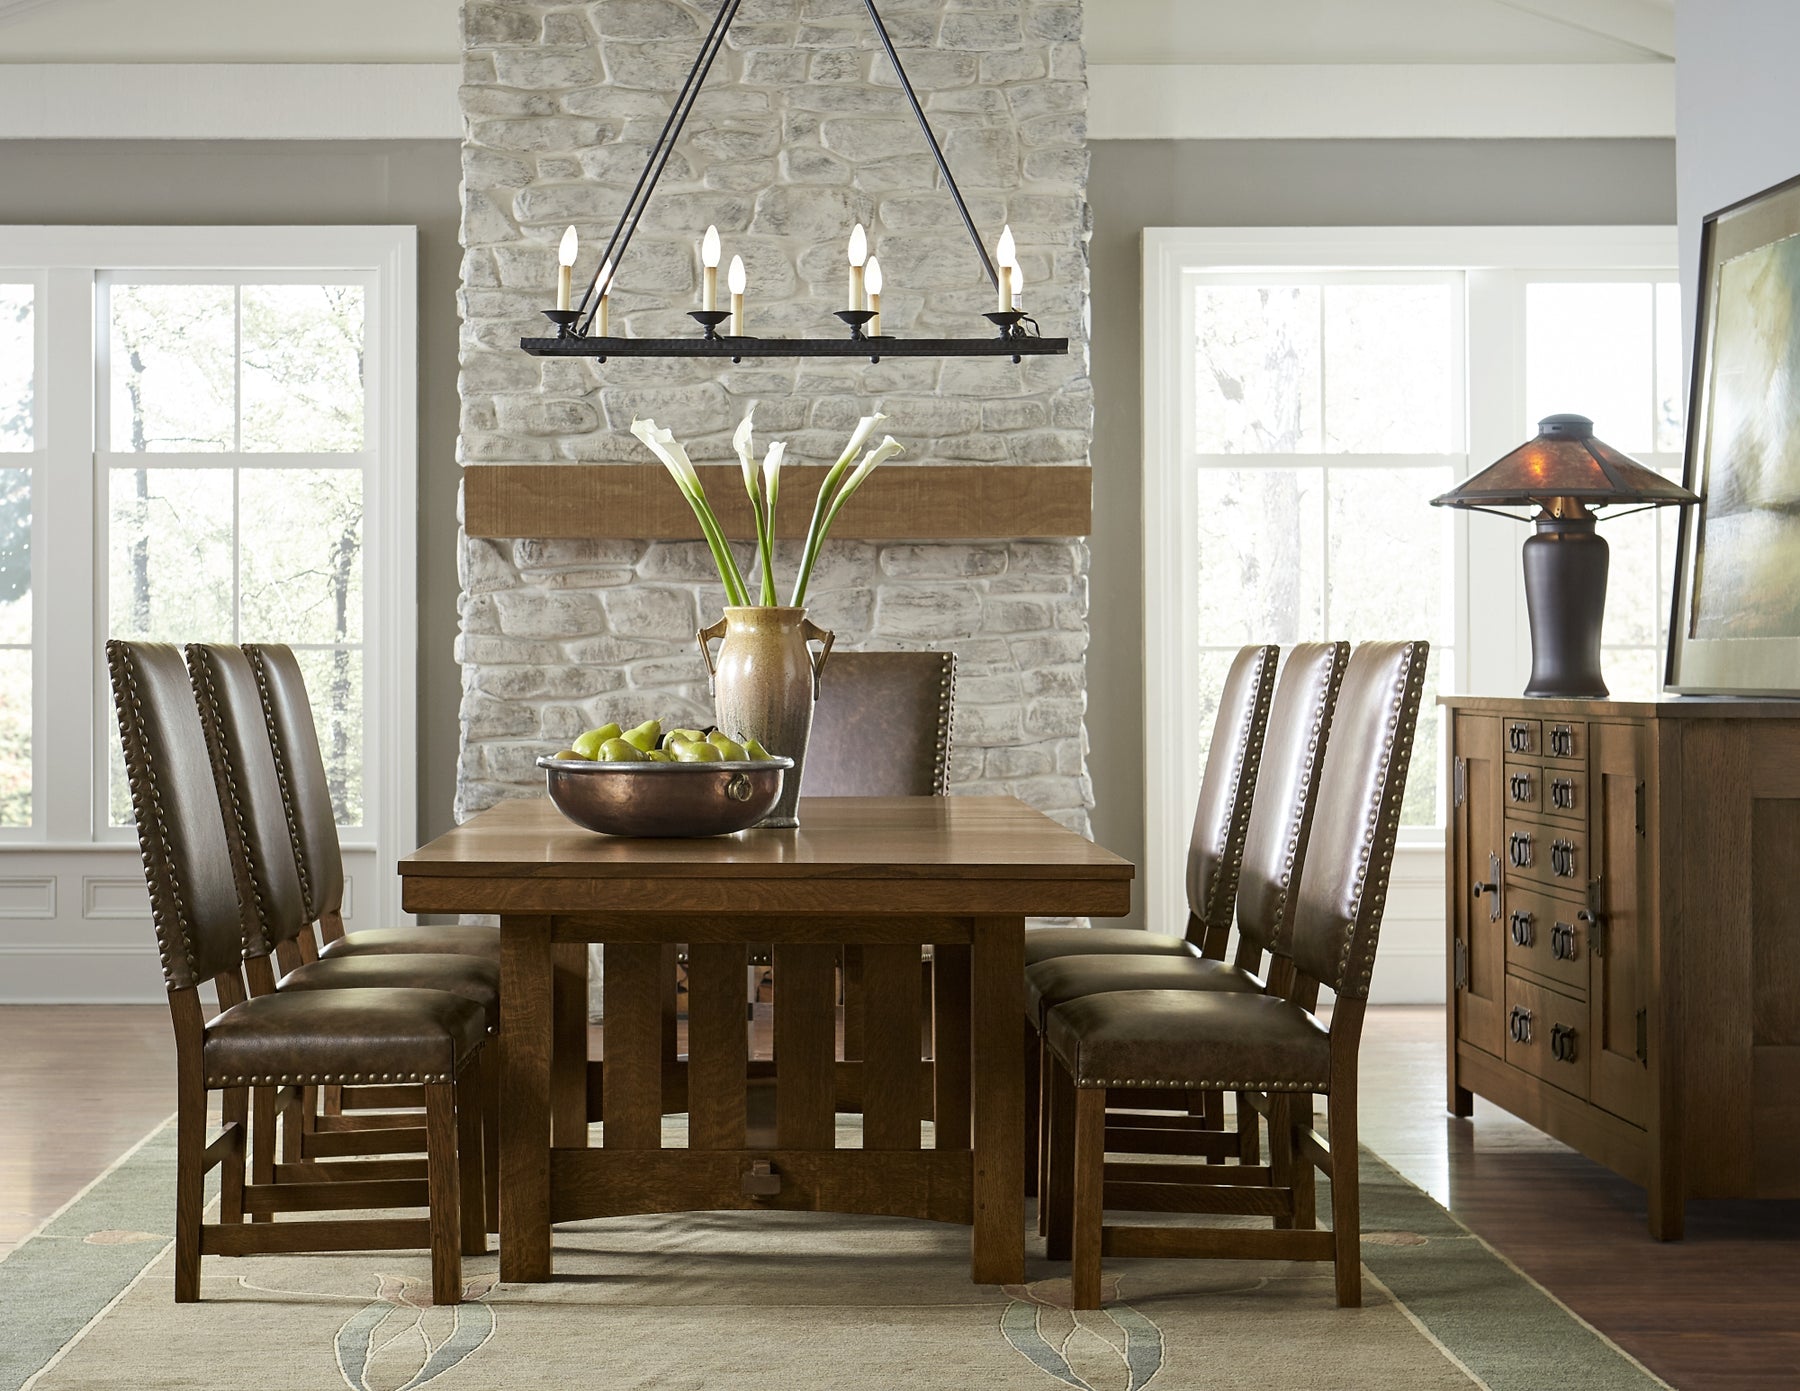 Traditional, rustic dining room featuring a large, rectangular dark wood dining table surrounded by leather upholstered chairs. A metal light fixture hangs from the ceiling and dark wood buffet cabinet sits against the right-hand wall.